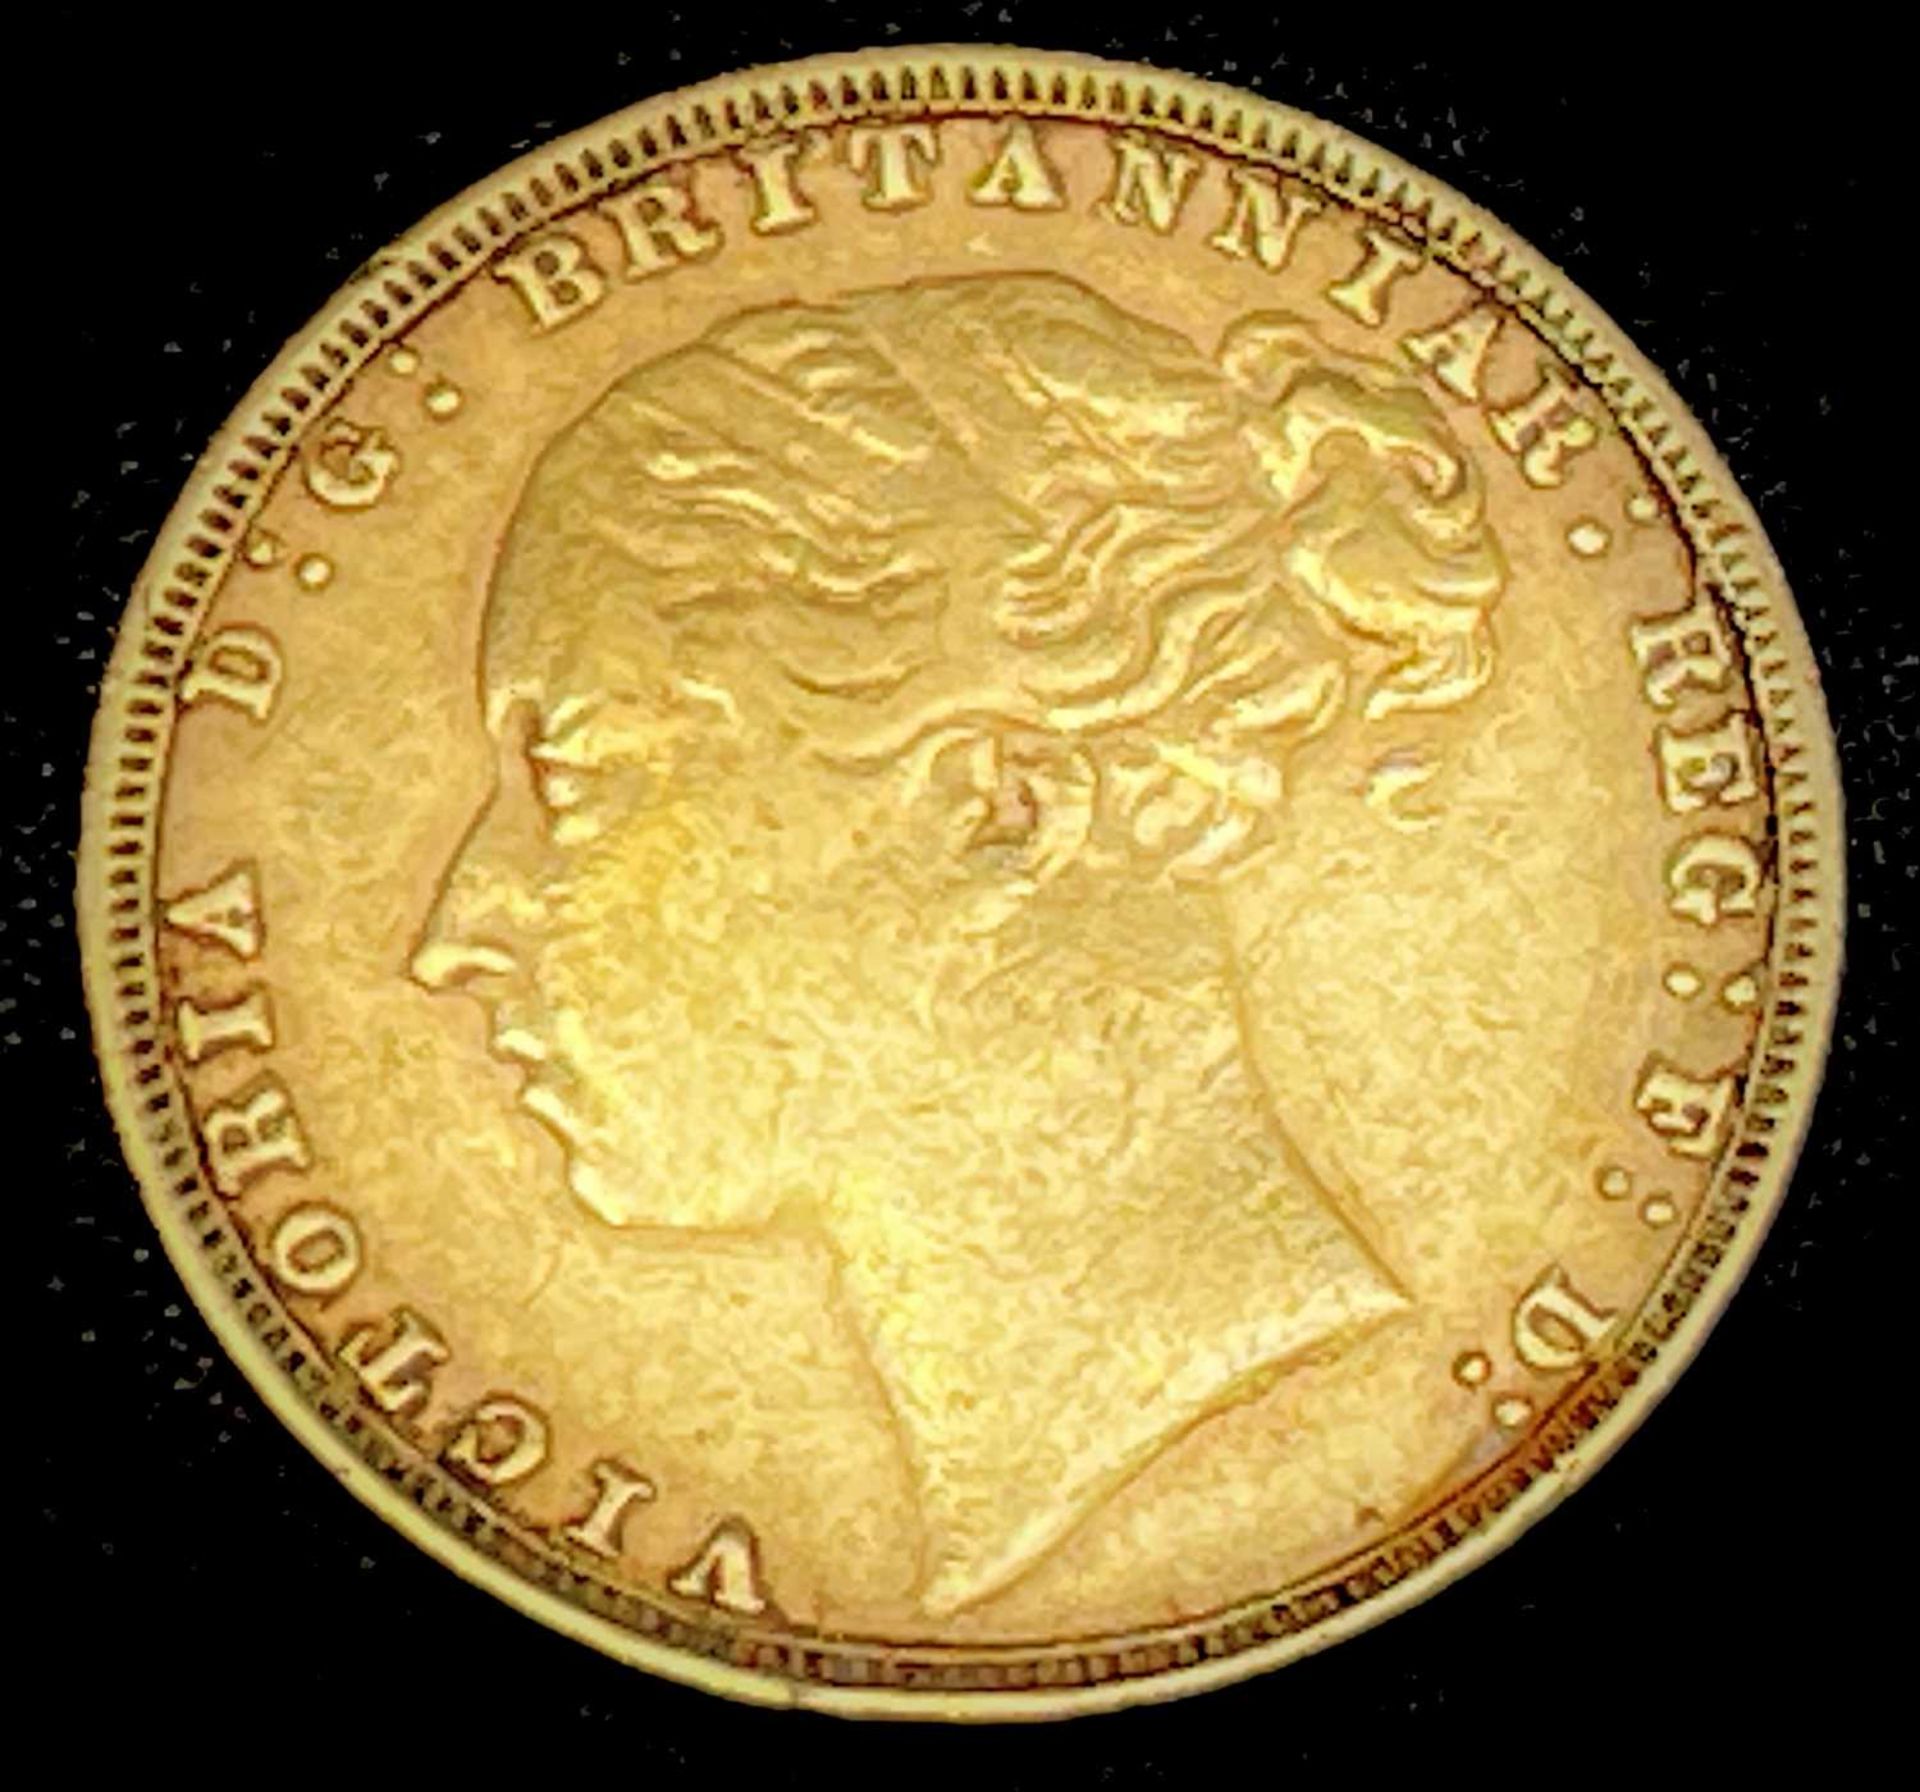 Great Britain Gold Sovereign 1880 George & Dragon Condition: please request a condition report if